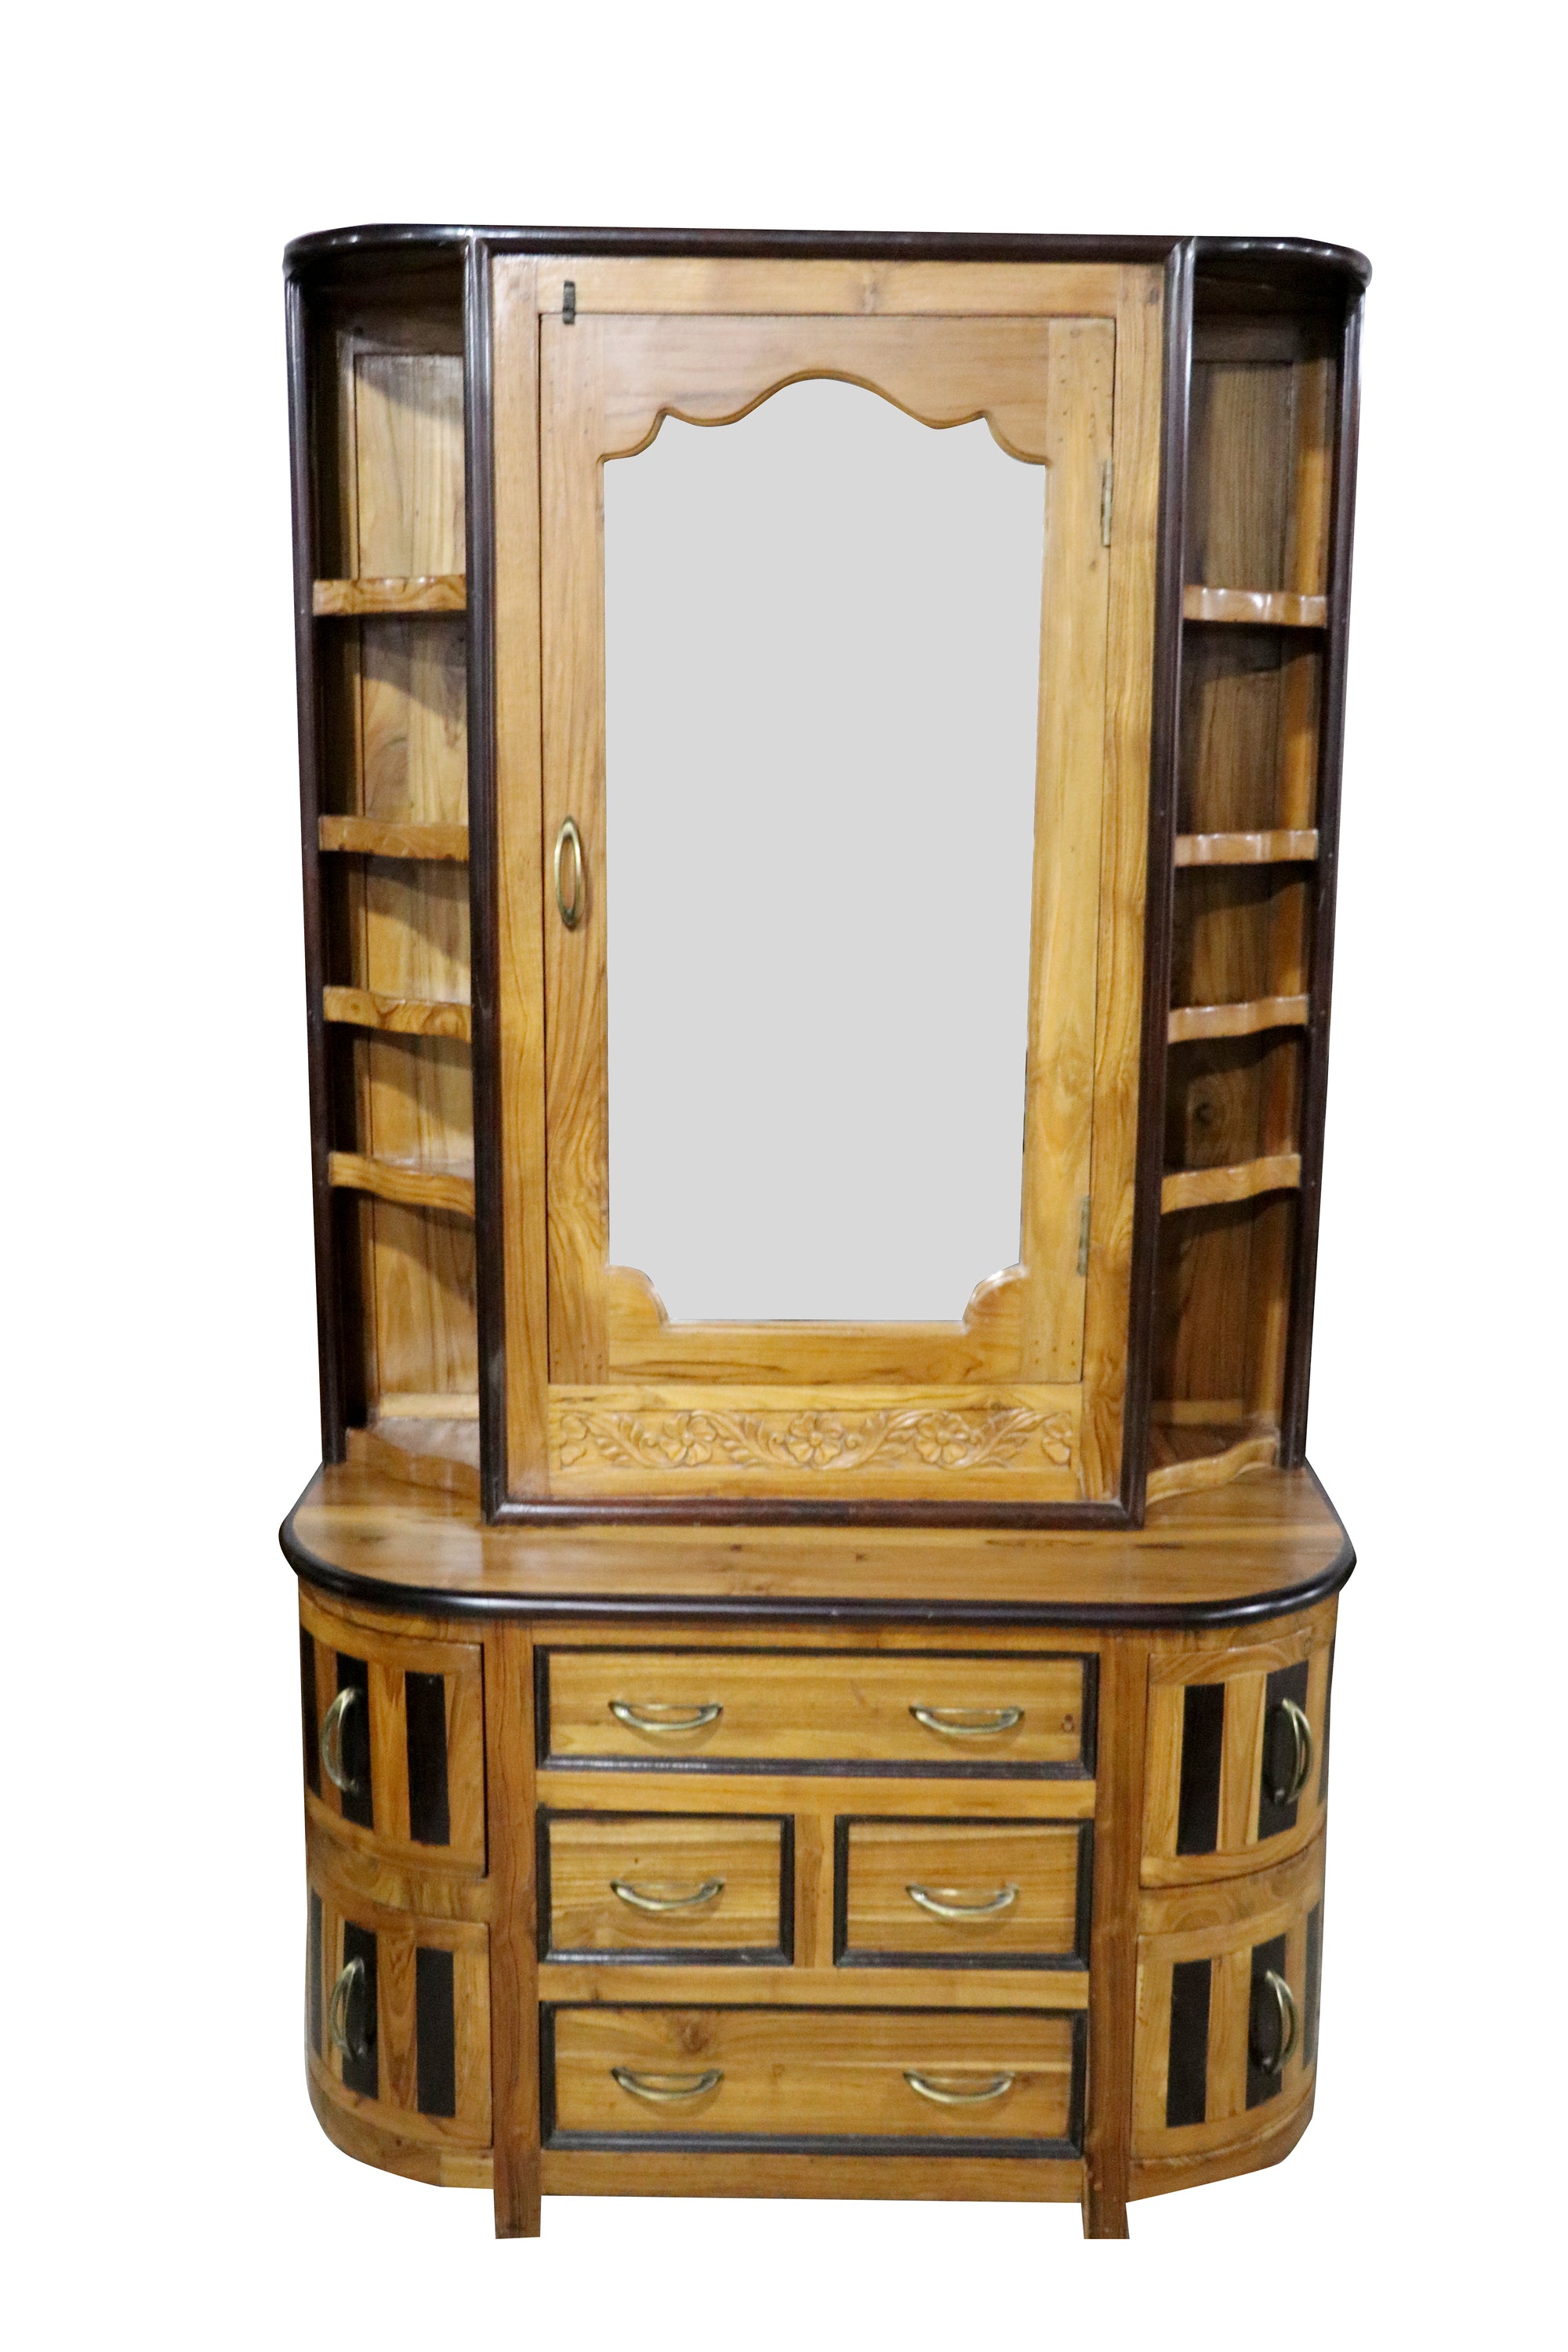 DRESSING TABLE WOOD WITH METAL LEG MIRROR DT8ND9615